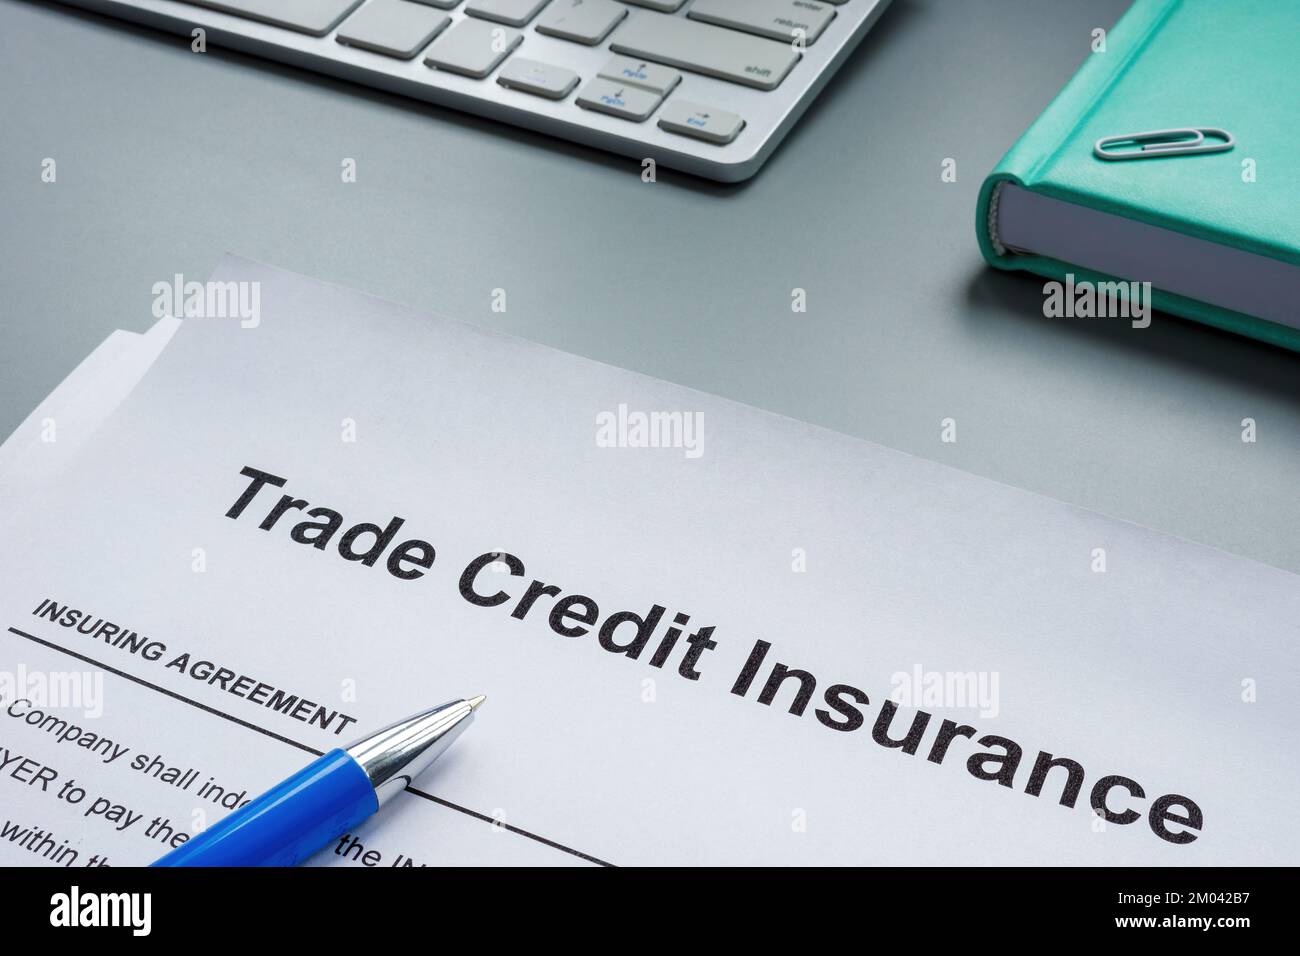 Trade credit insurance application form for signing. Stock Photo